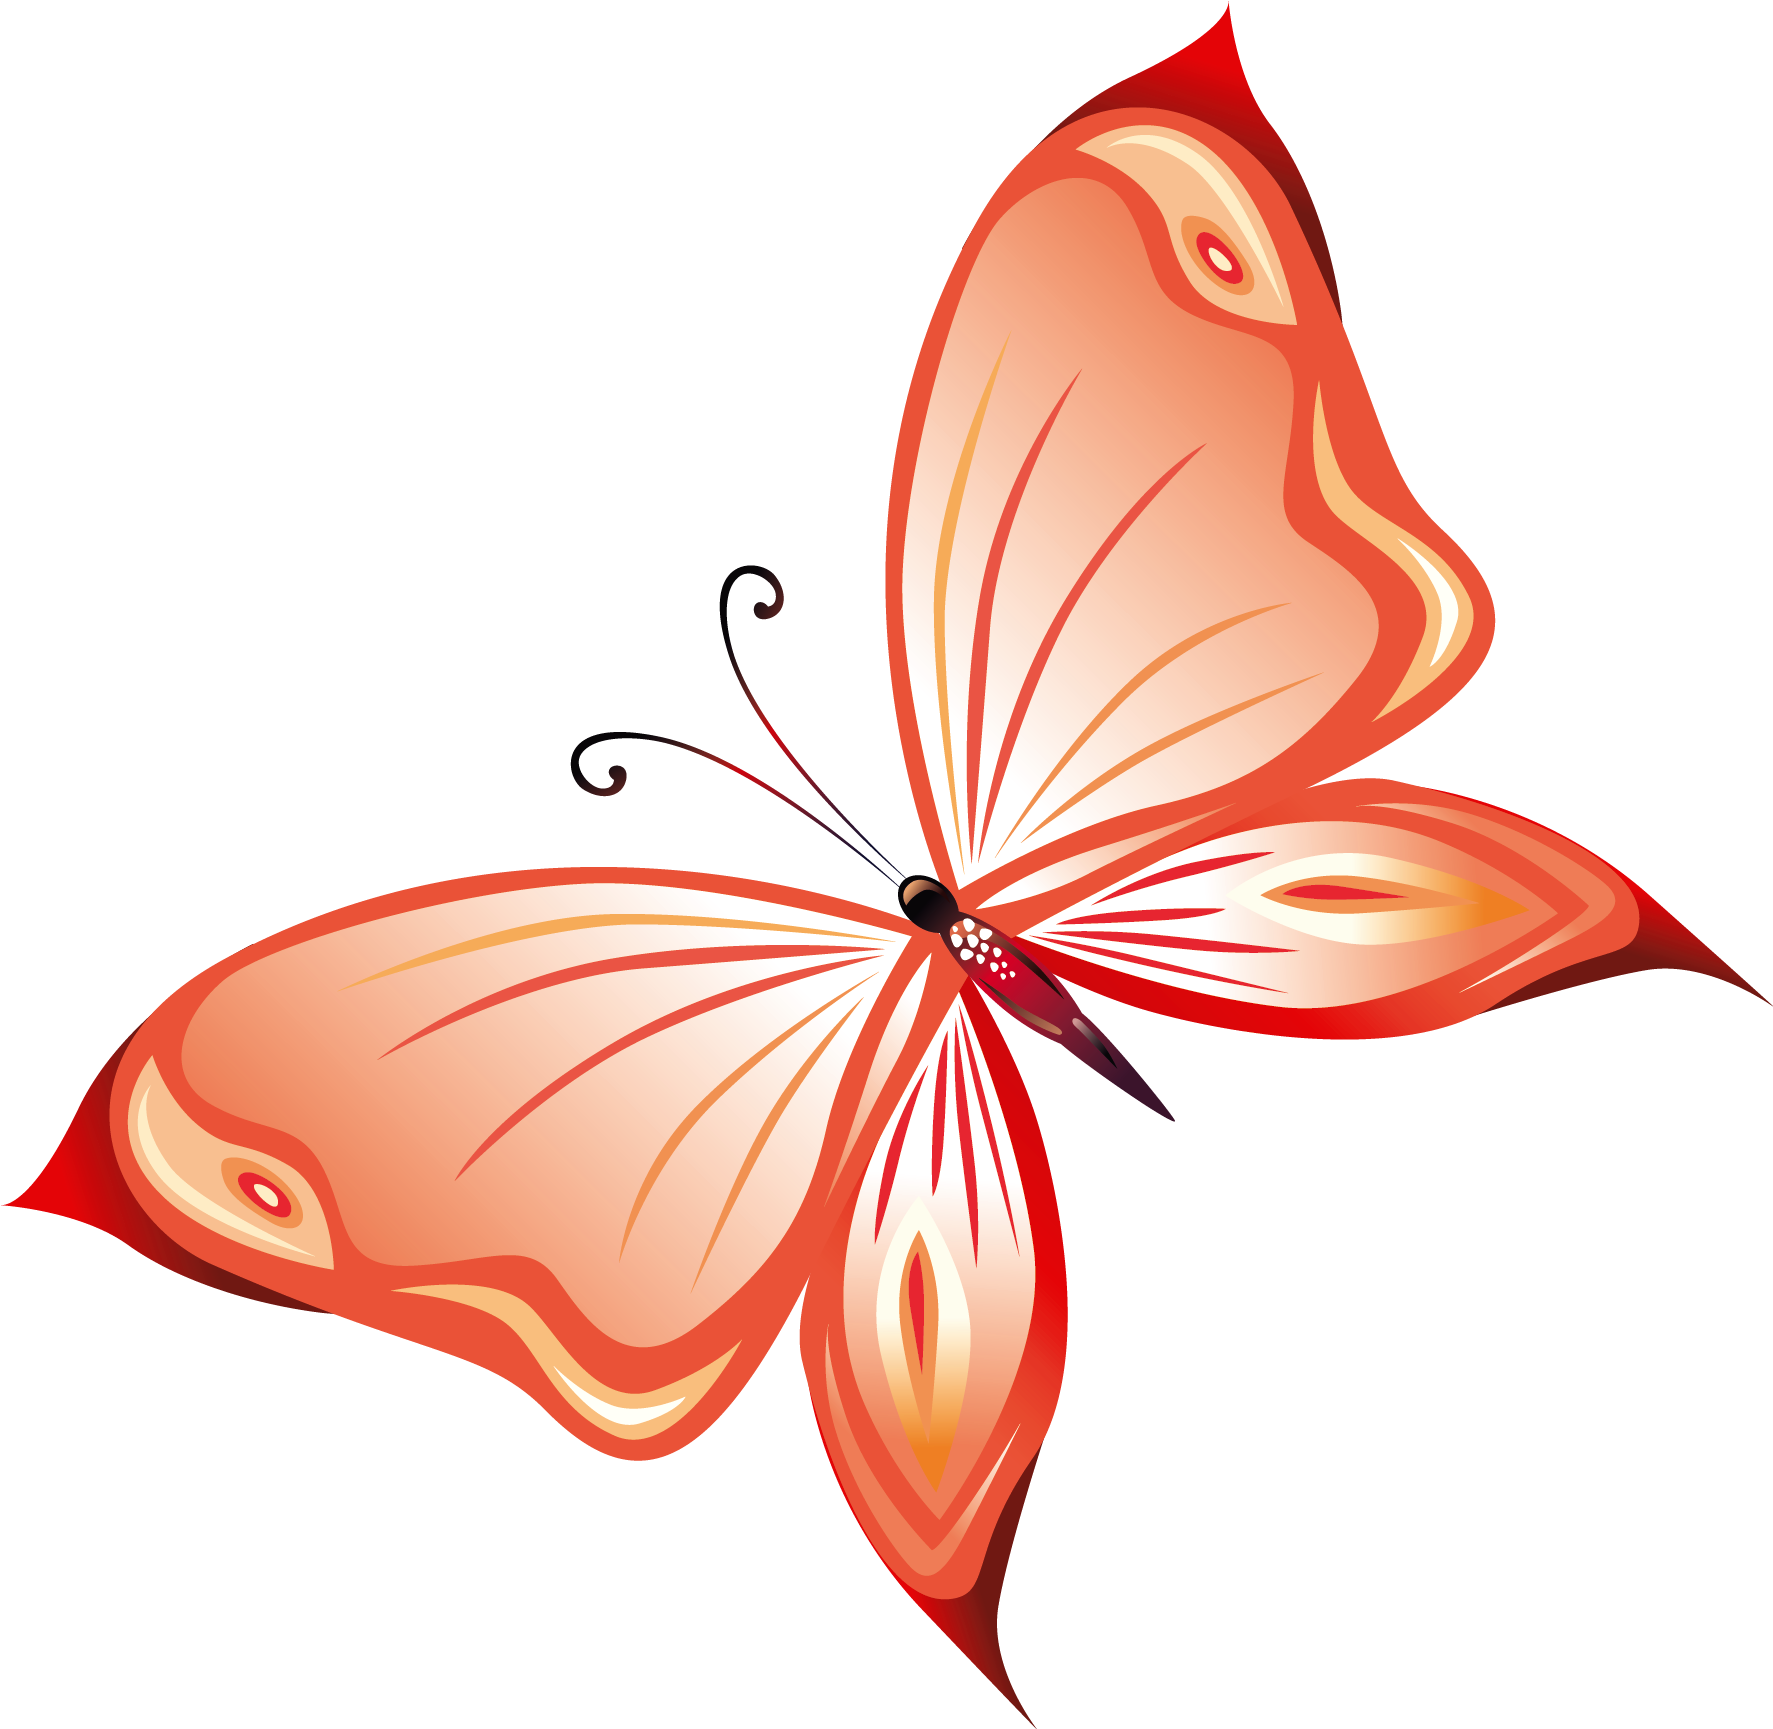 Transparent Red Butterfly Png Clipartu200b Gallery - Transparent Red Butter...